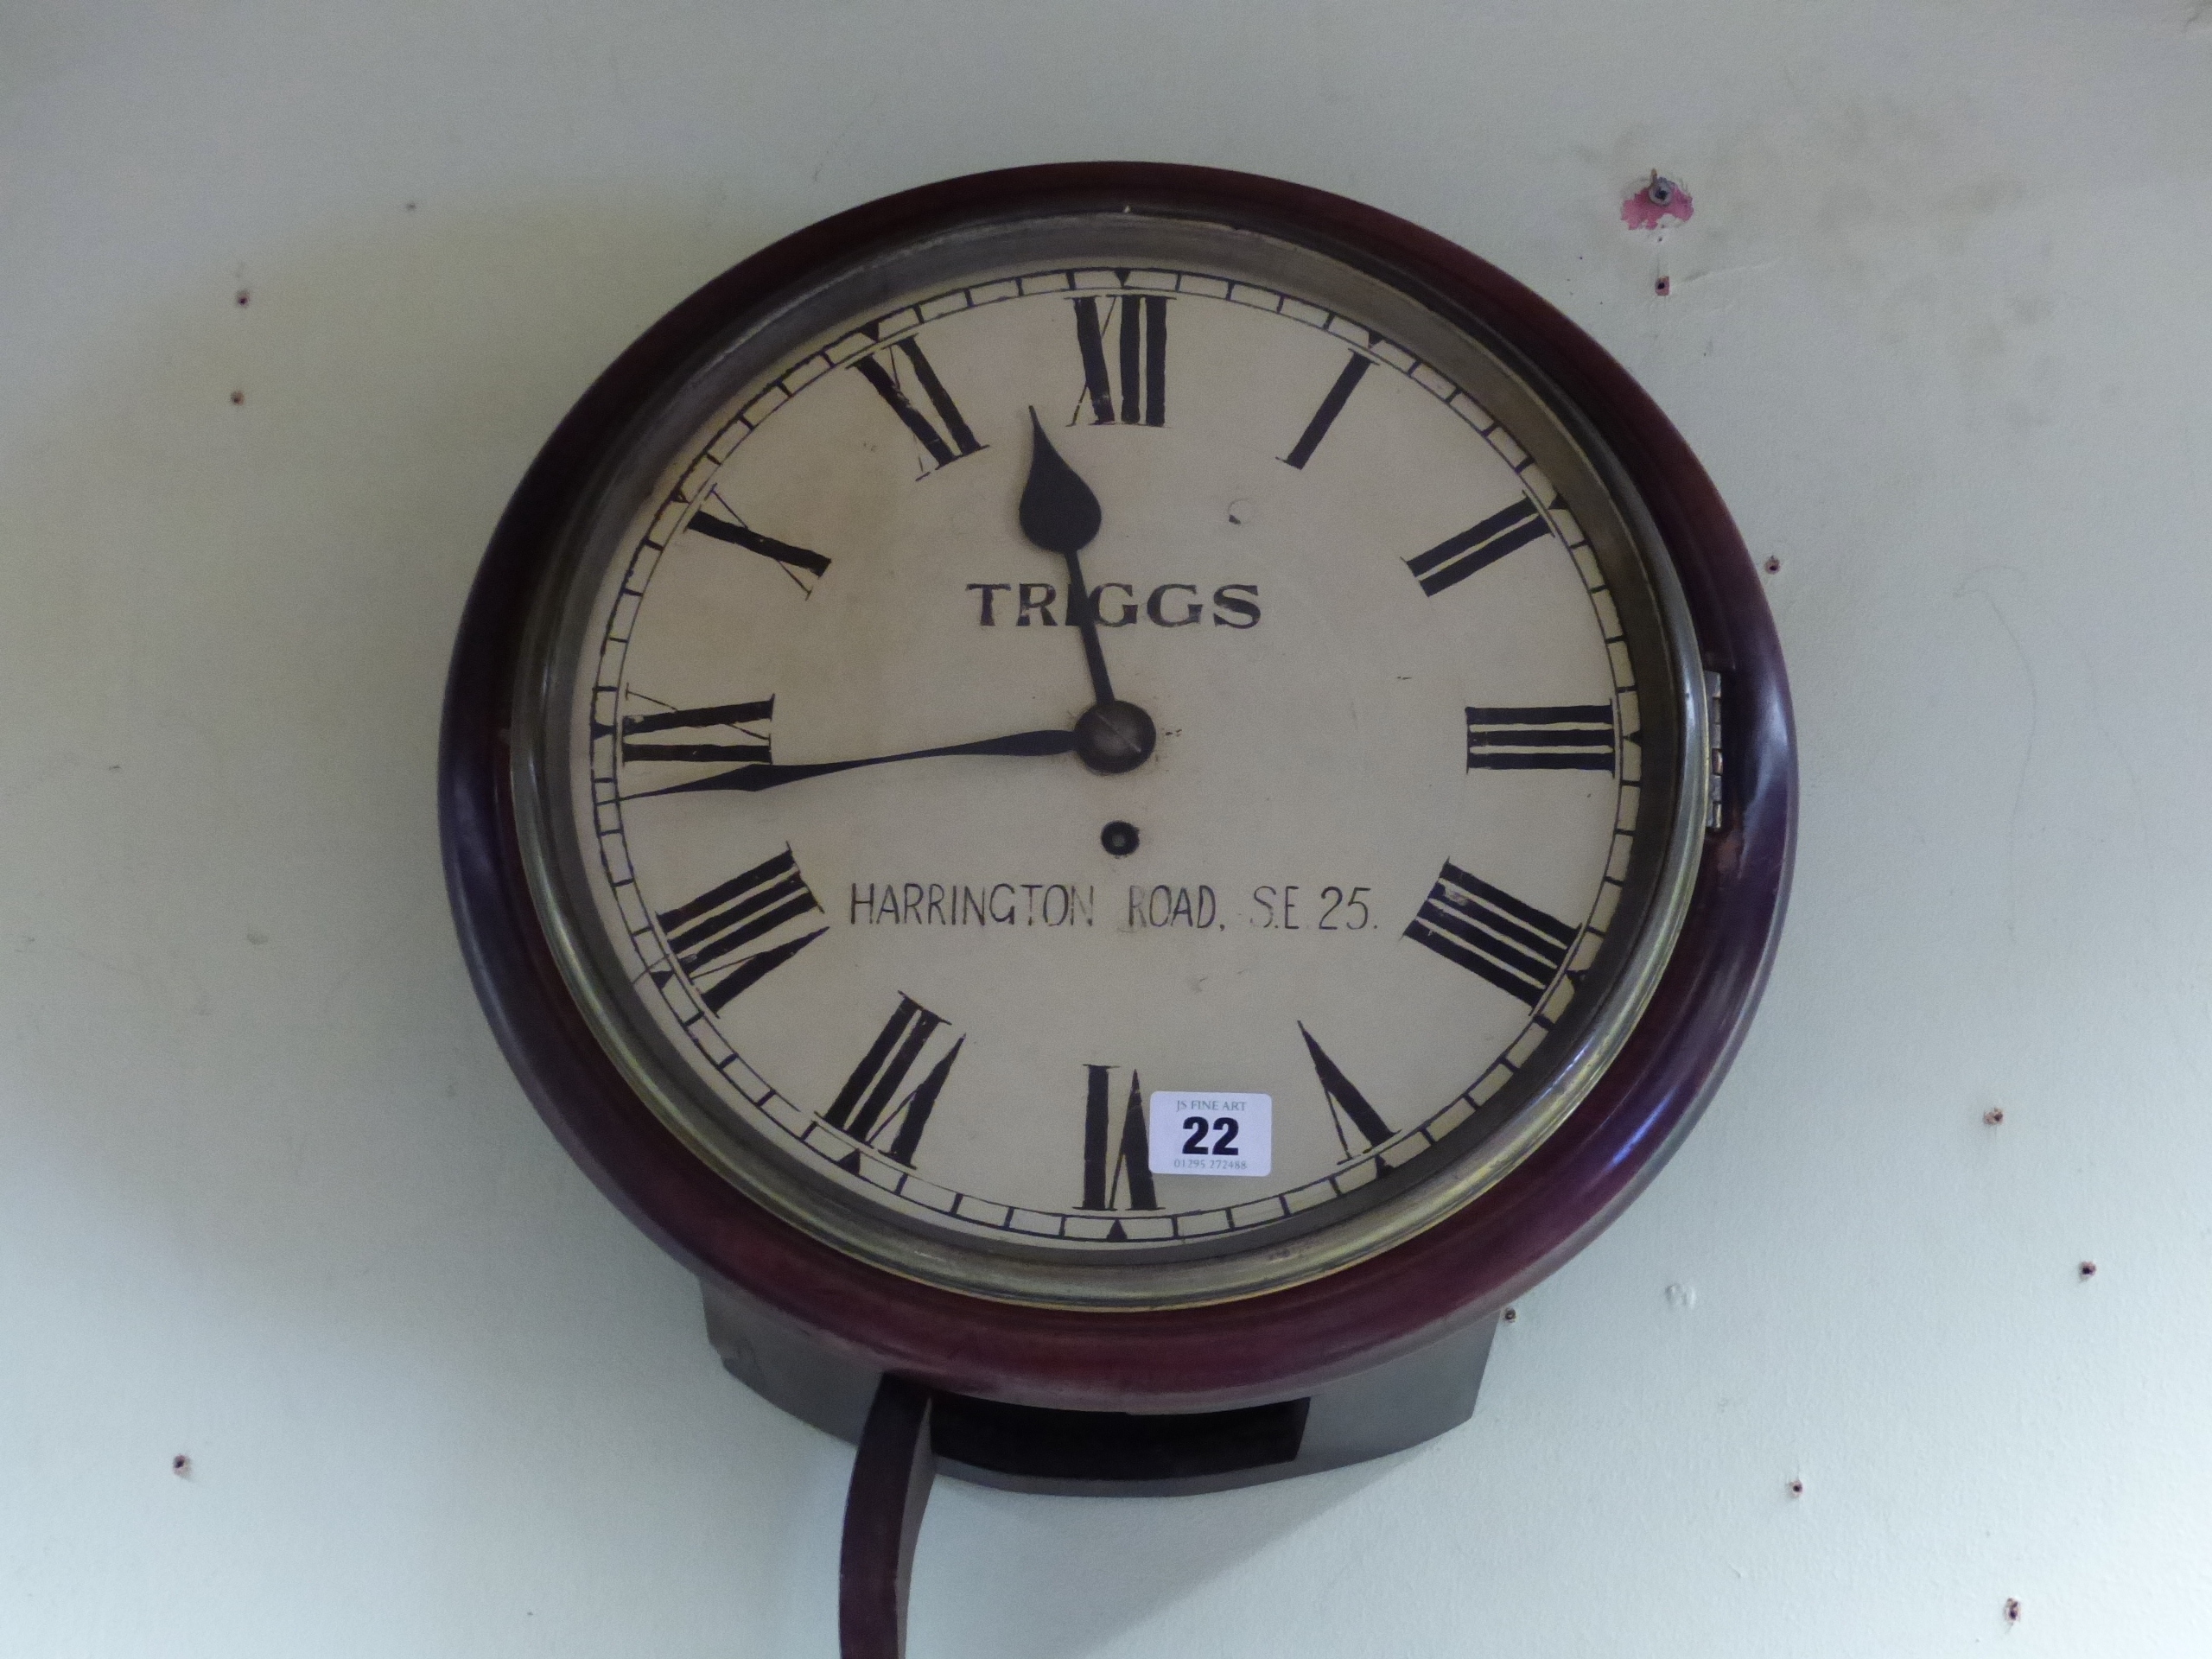 AN EARLY 19th.C.MAHOGANY CASED ROUND DIAL WALL CLOCK WITH SINGLE FUSEE MOVEMENT, THE DIAL SIGNED